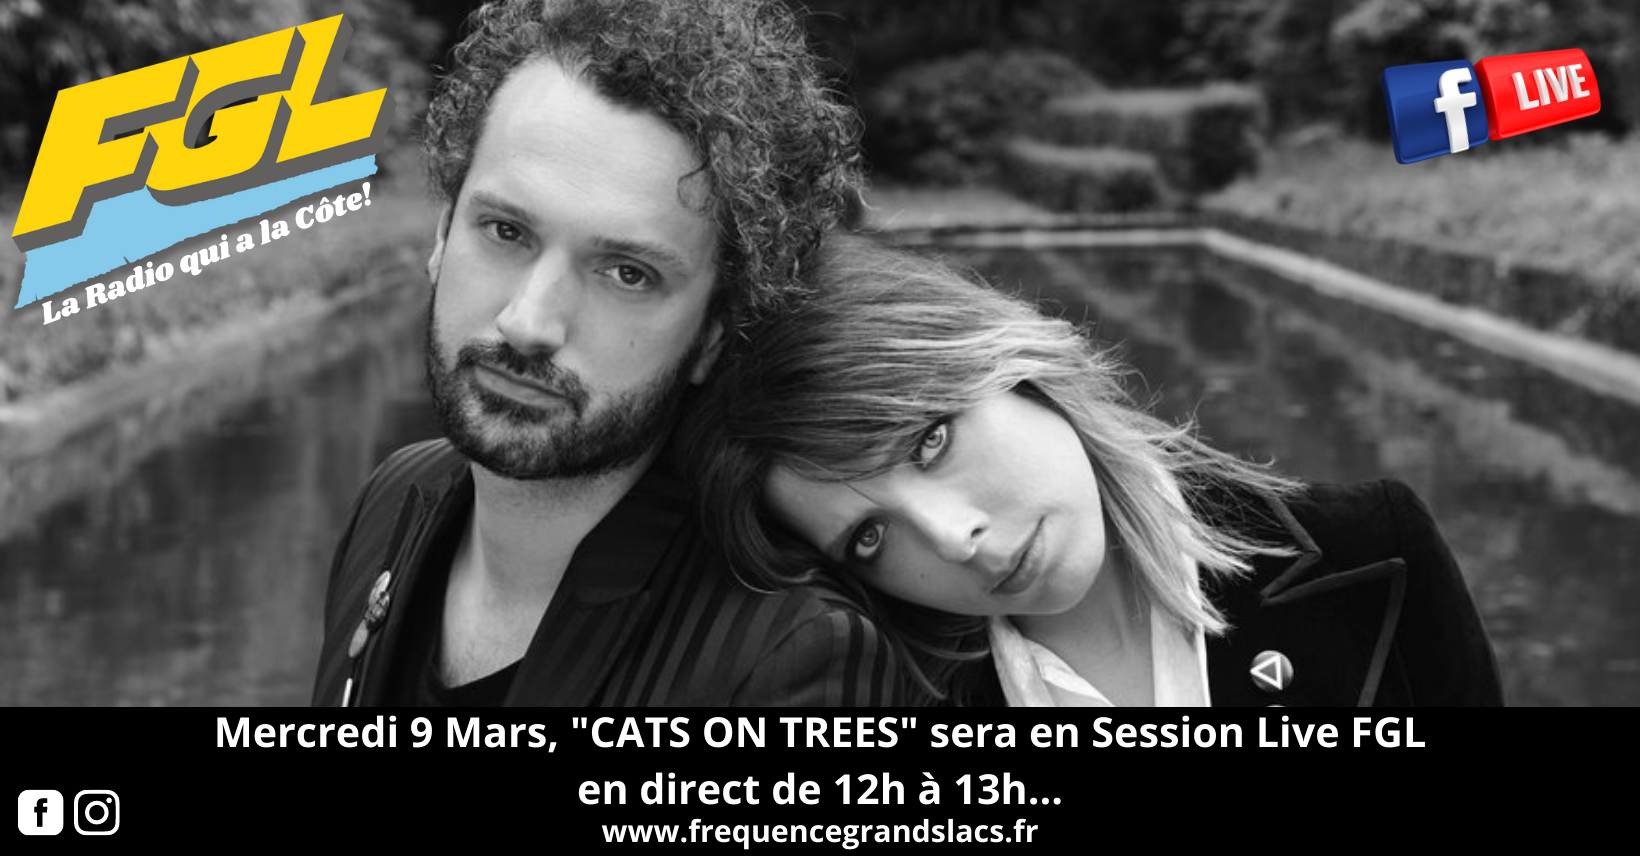 Le groupe "Cats on Trees" à FGL